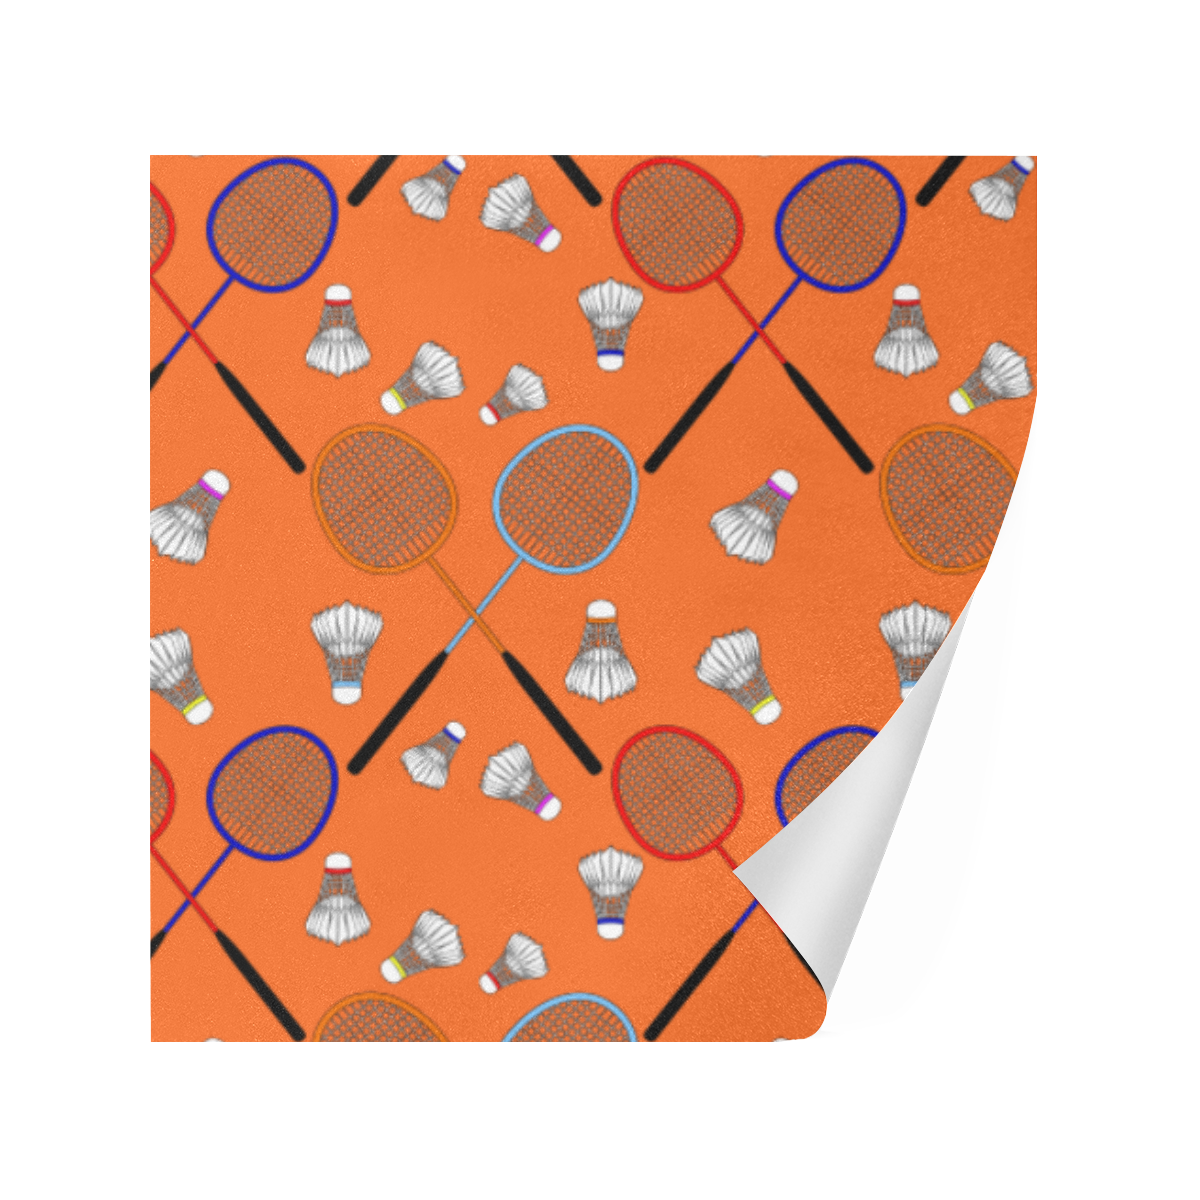 Badminton Rackets and Shuttlecocks Pattern Sports Orange Gift Wrapping Paper 58"x 23" (2 Rolls)